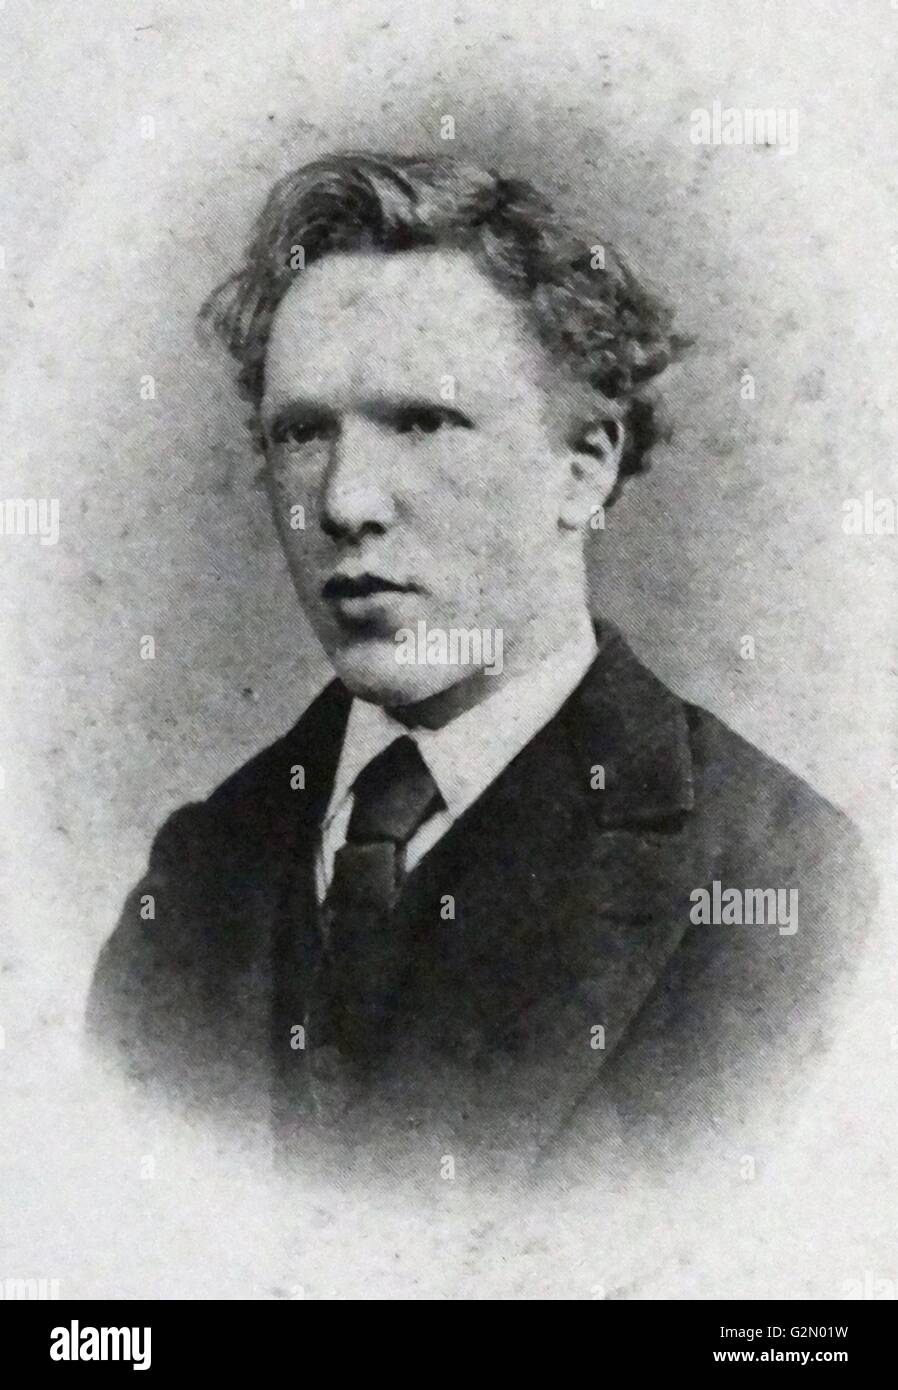 Head and shoulders portrait of the famous Dutch artist Vincent Van Gogh (30th March 1853 - 29th July 1890), photograph taken in 1871. Stock Photo